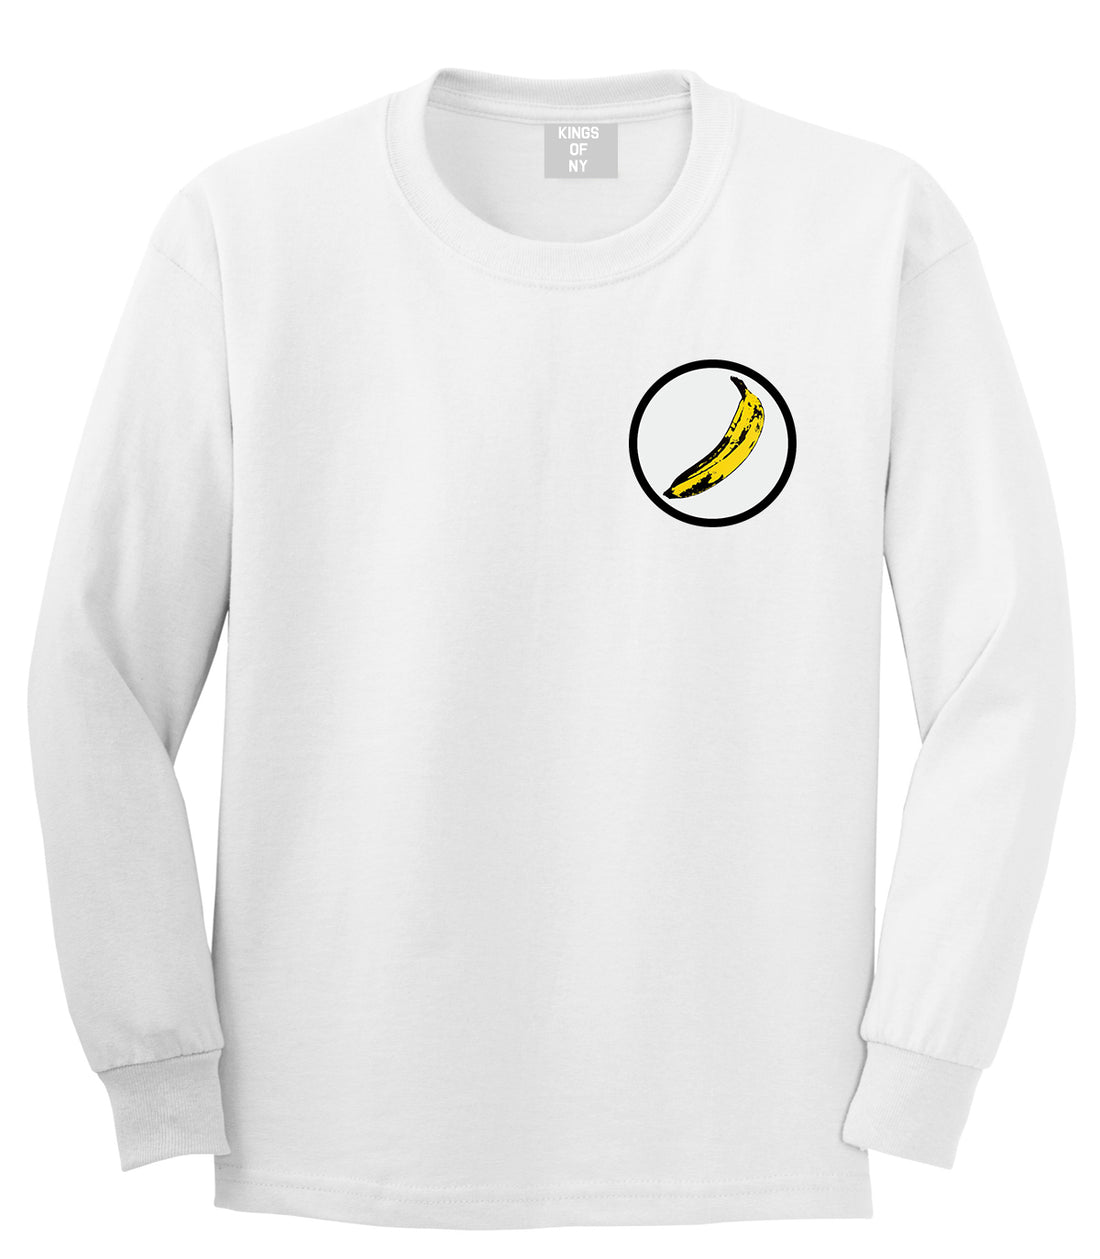 Banana Chest White Long Sleeve T-Shirt by Kings Of NY